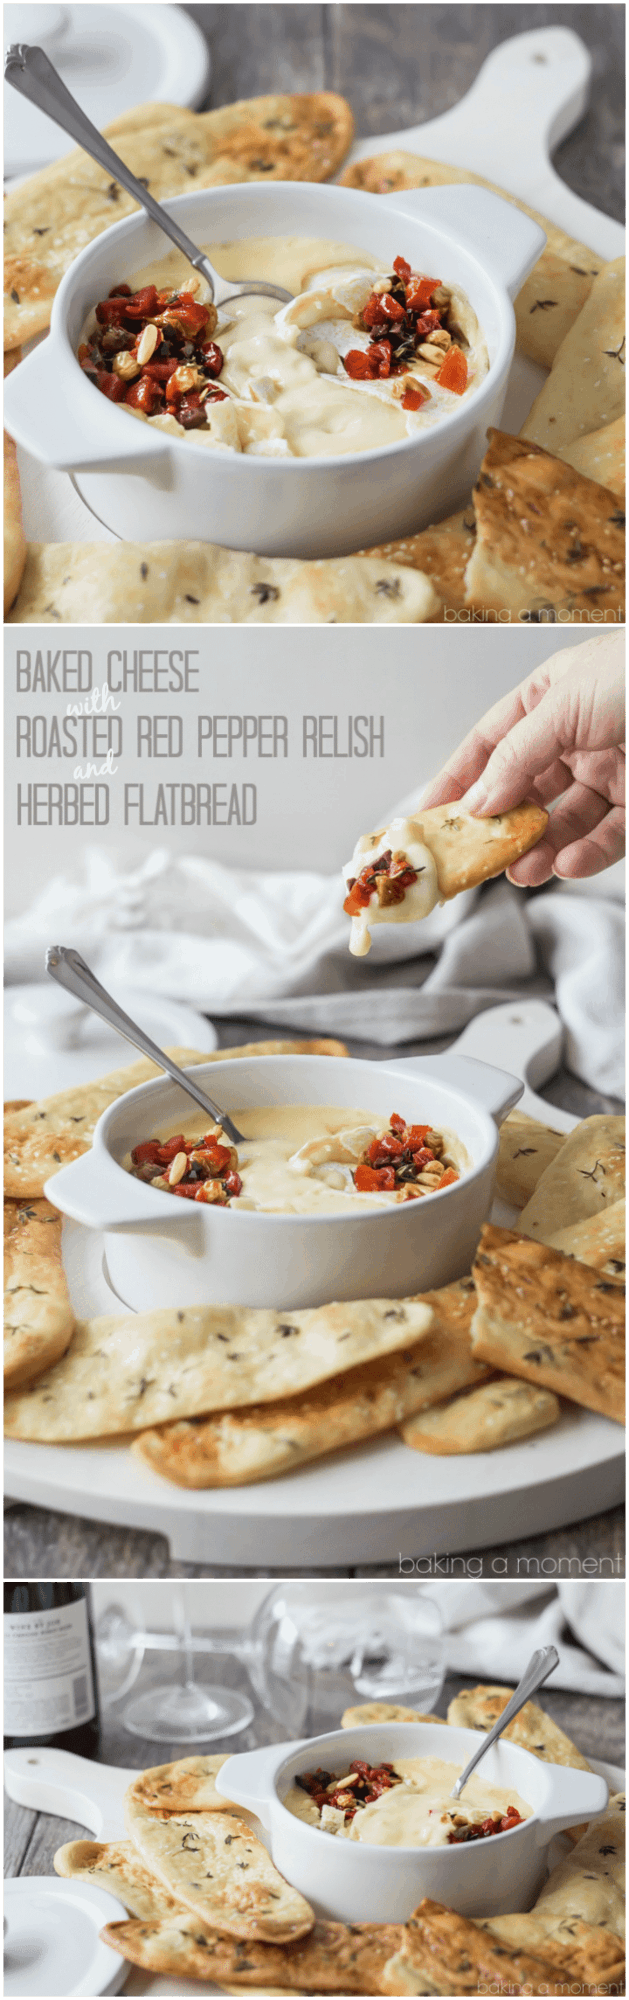 Serve this simple appetizer at your next get-together! The baked cheese is so creamy, and couldn't be simpler to make, and the roasted red pepper relish has tons of smoky-sweet flavor! Scoop it all up with crunchy homemade herbed flatbreads. @marthastewart @macys #marthastewartcollection #mscollection